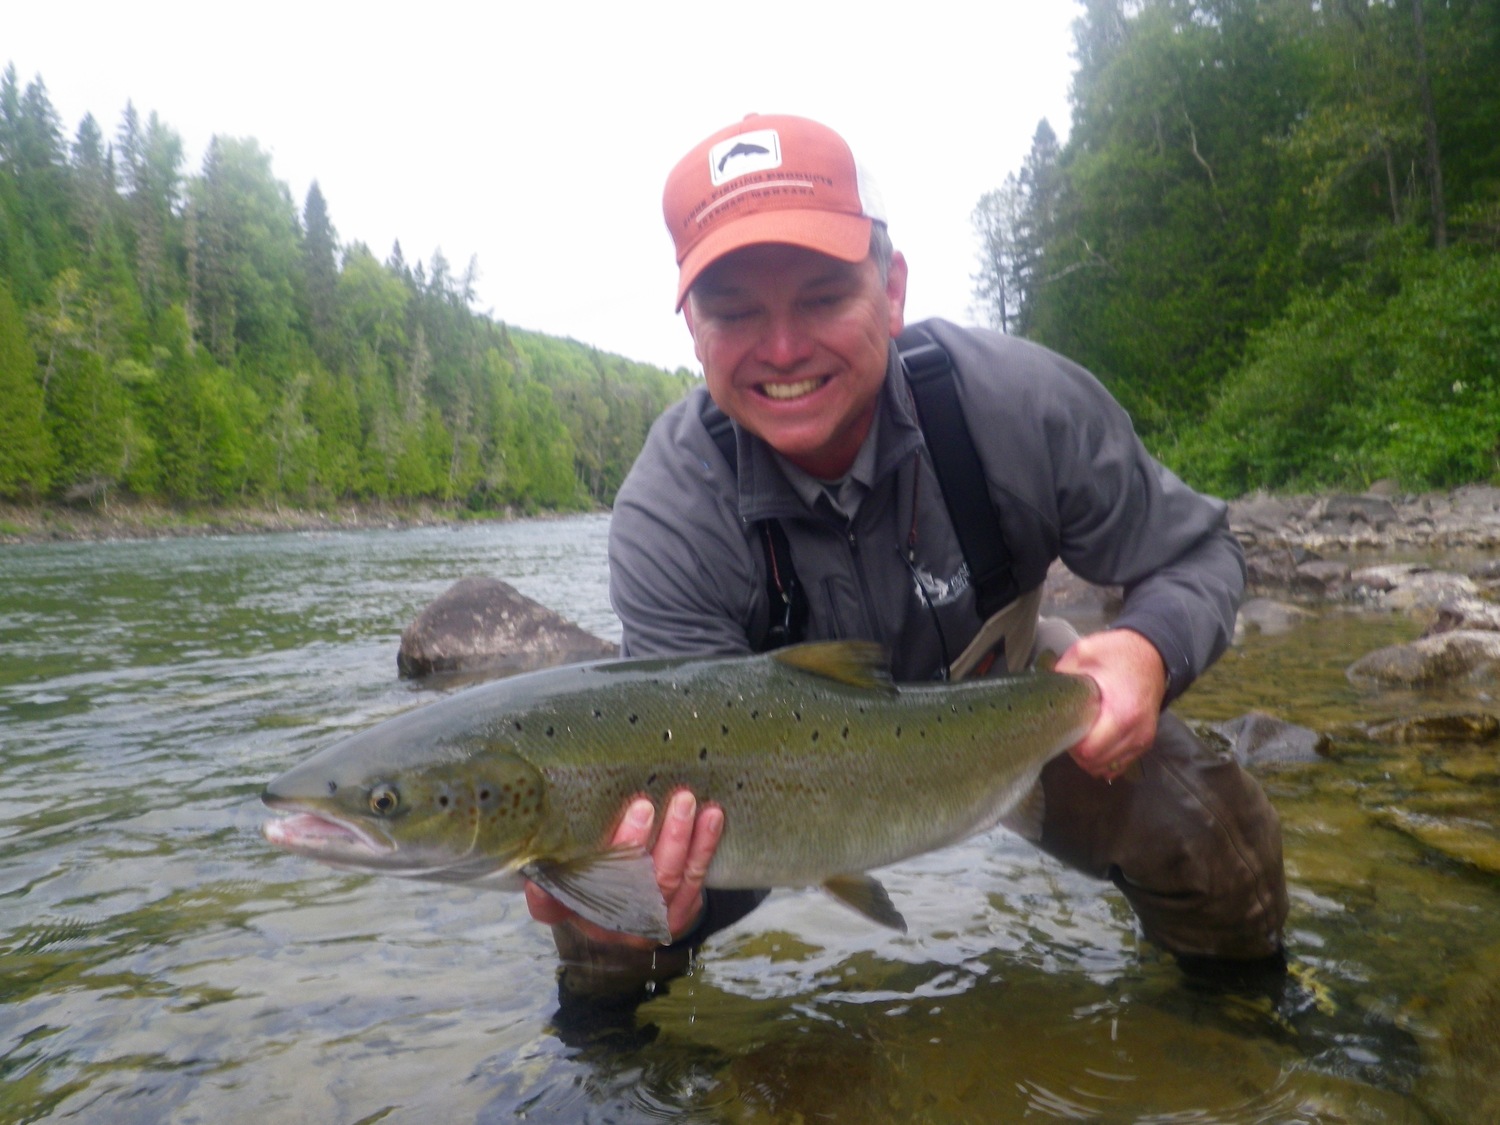 Another very very happy customer just look at that smile as he holds his Atlantic Salmon